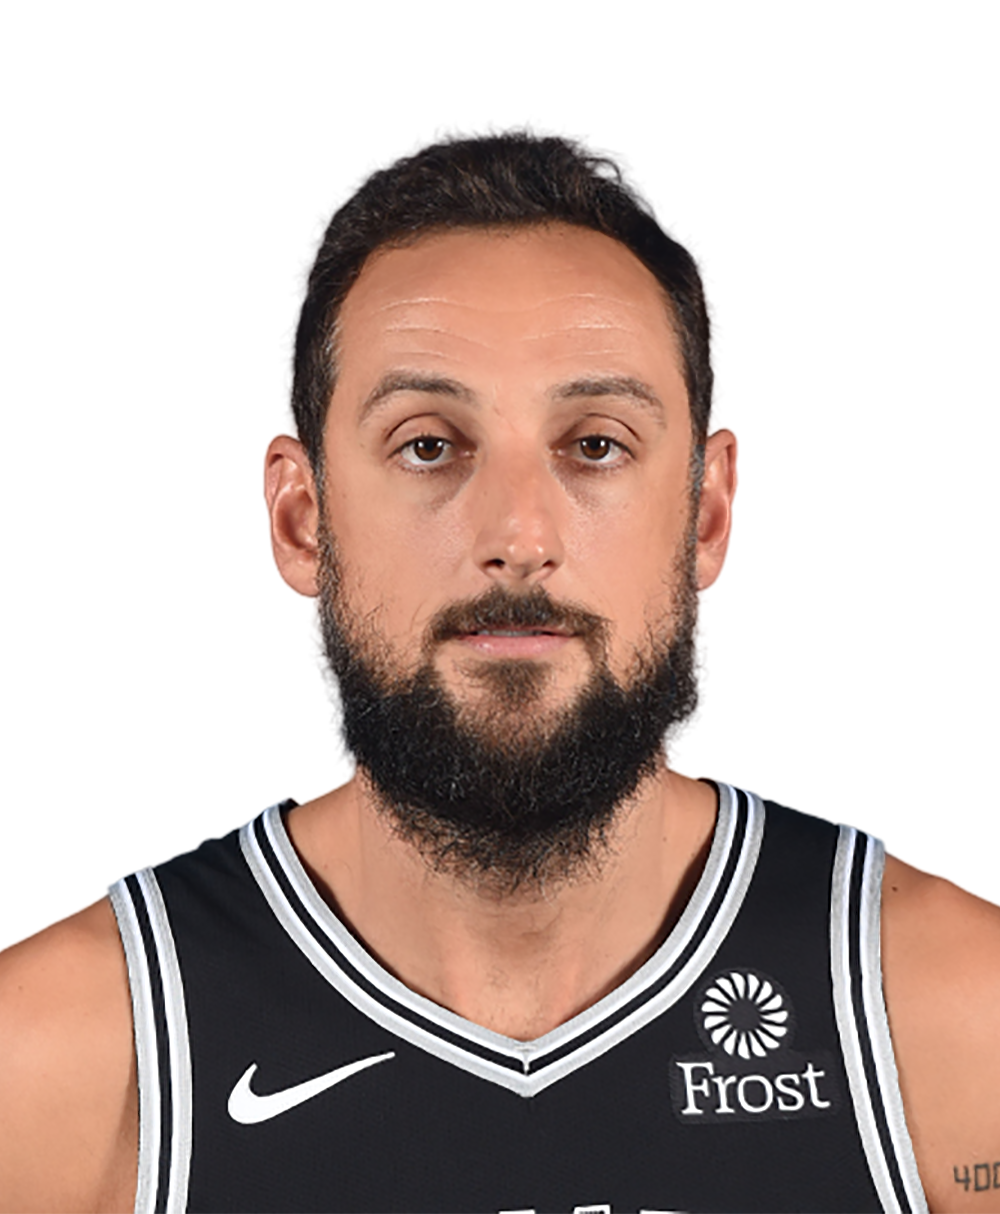 marco belinelli 3 point contest